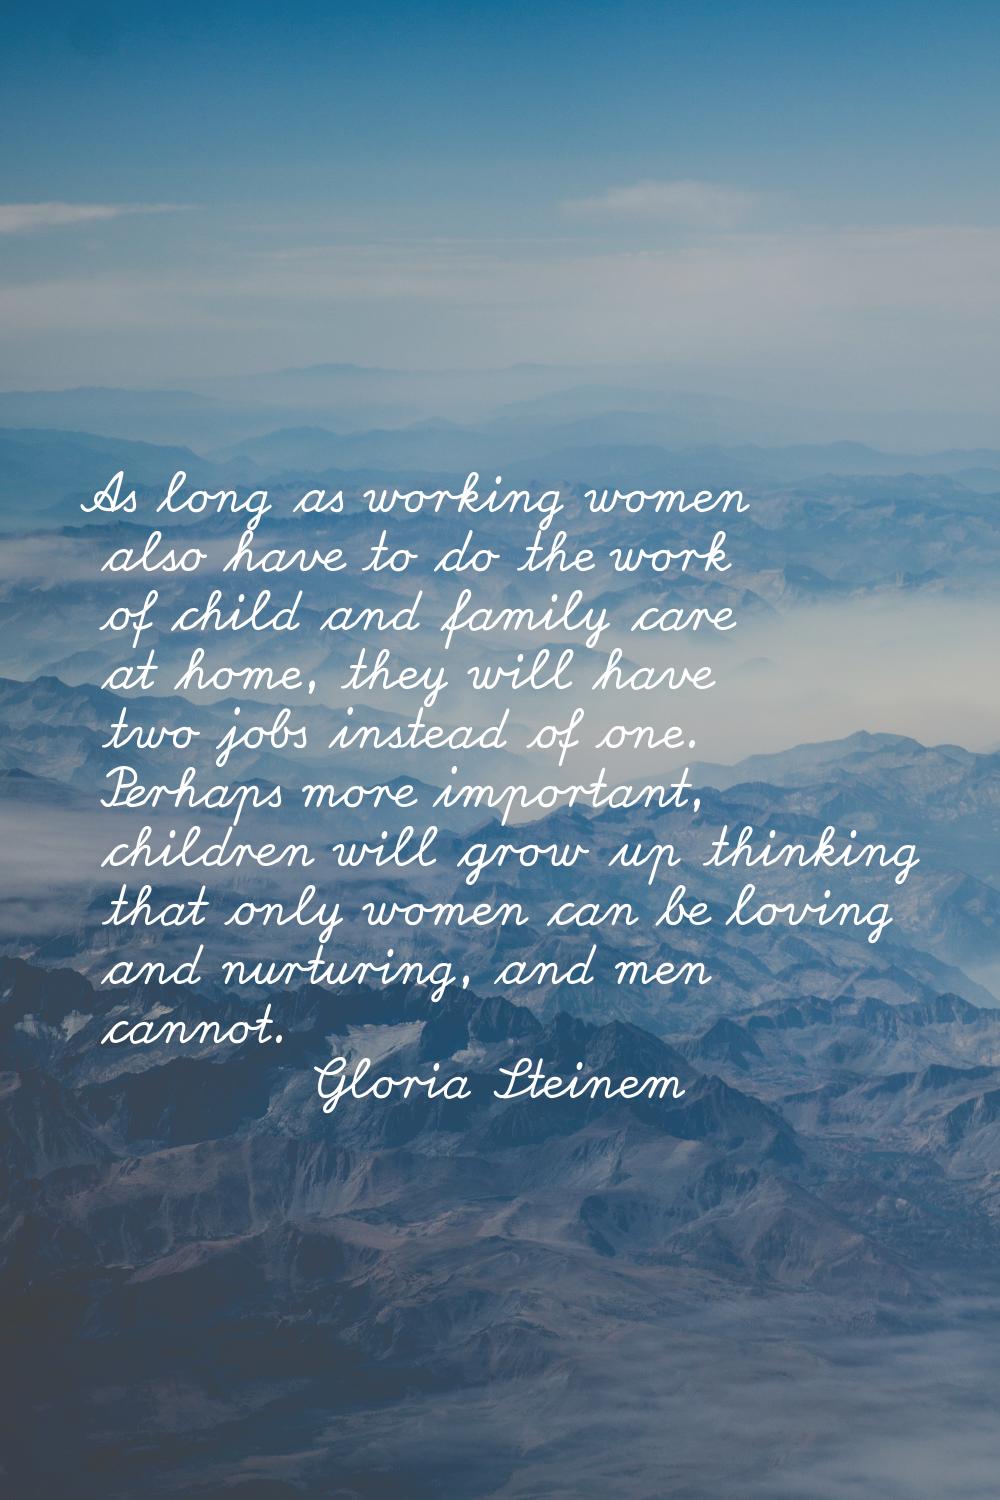 As long as working women also have to do the work of child and family care at home, they will have 